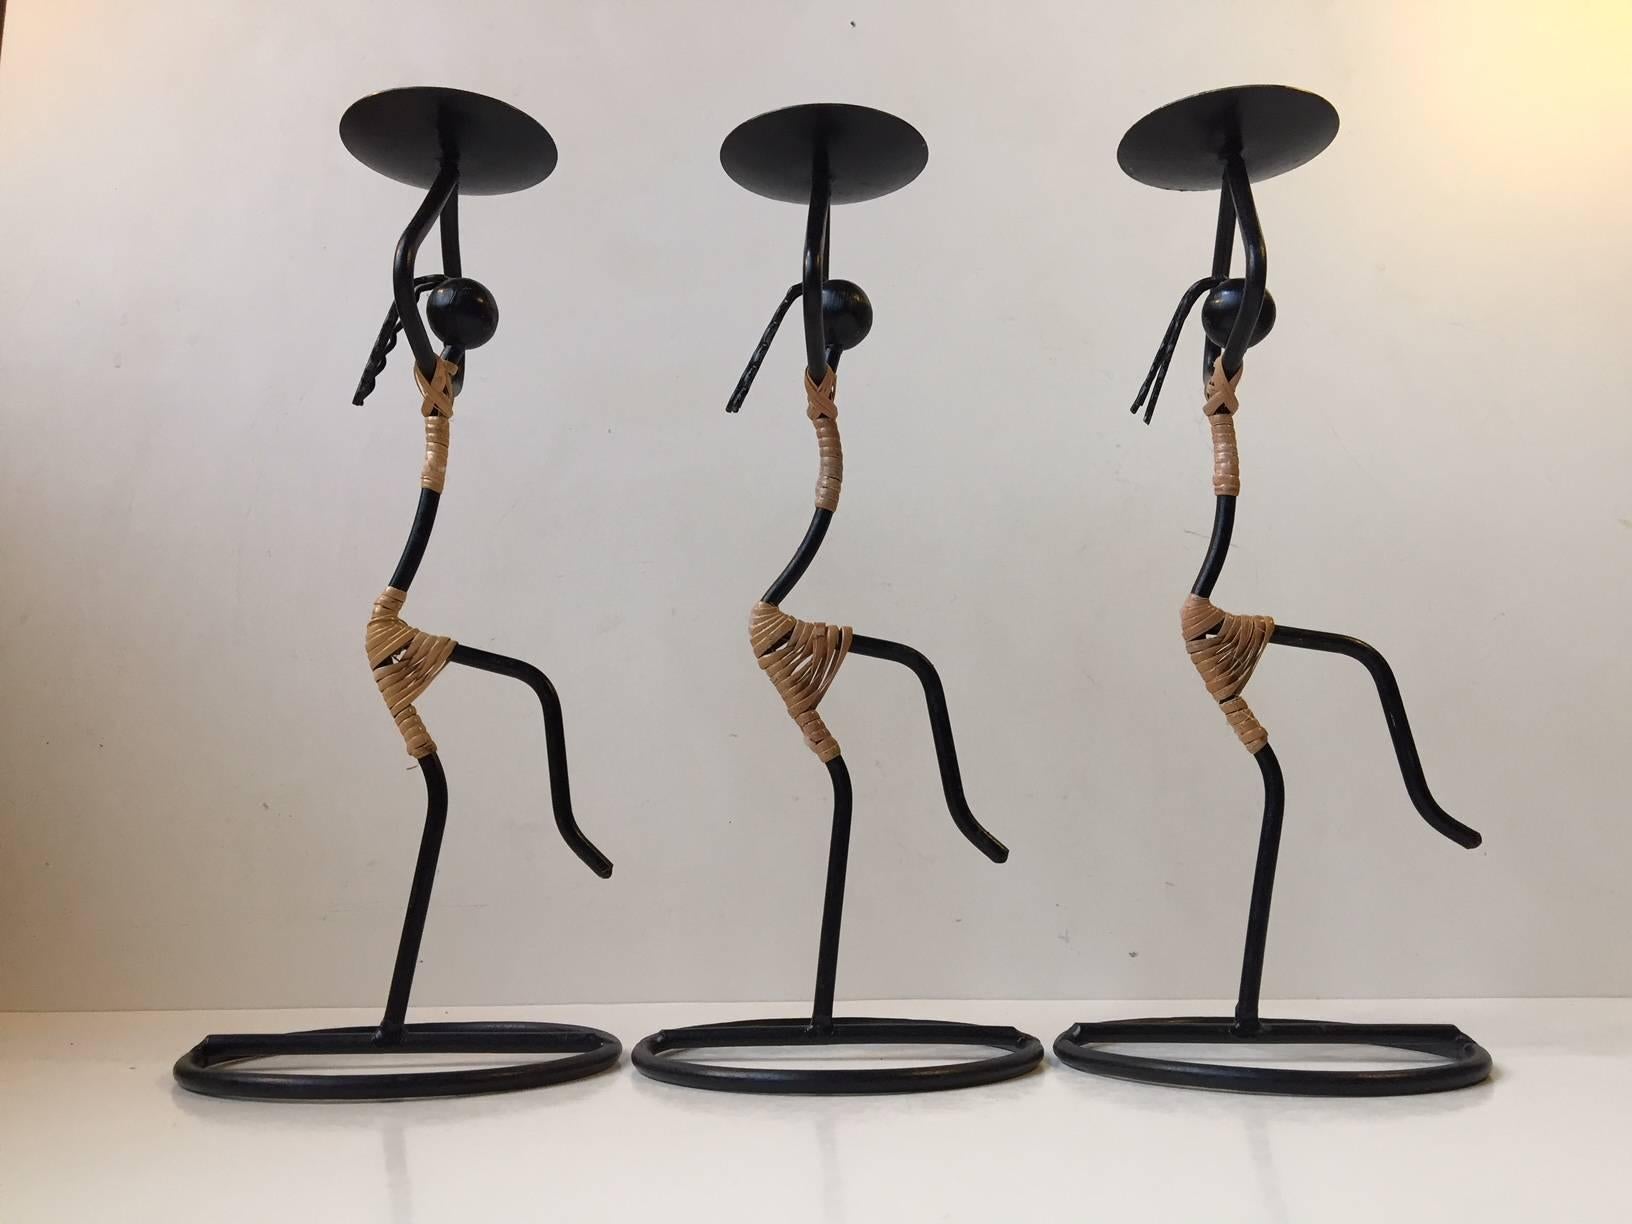 Decorative and sculptural trio of candleholders for bloc or ball candles. Designed and manufactured by Laurids Lonborg in Denmark during the 1960s. Composed of blackened string iron and rattan. The price is for the set of three.